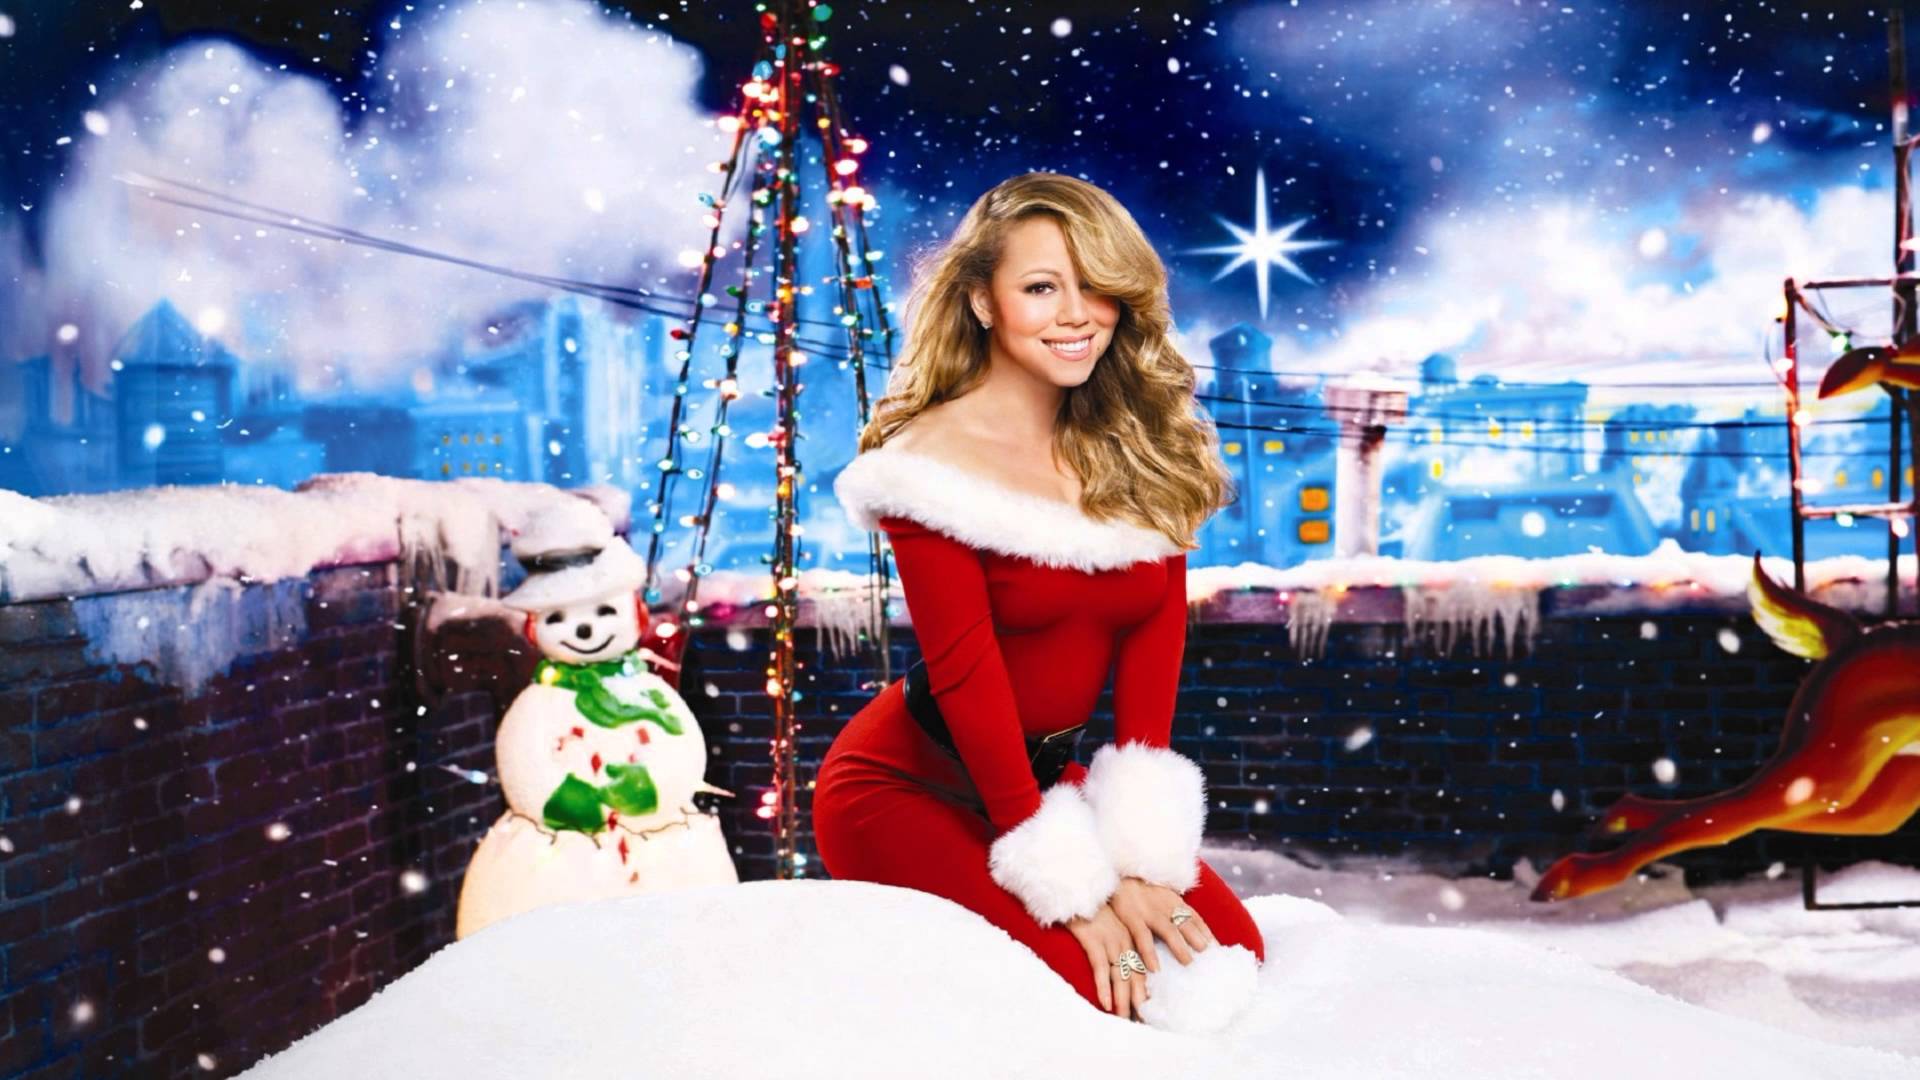 of the Best Christmas Songs Sung by Women for Your Holiday Playlist